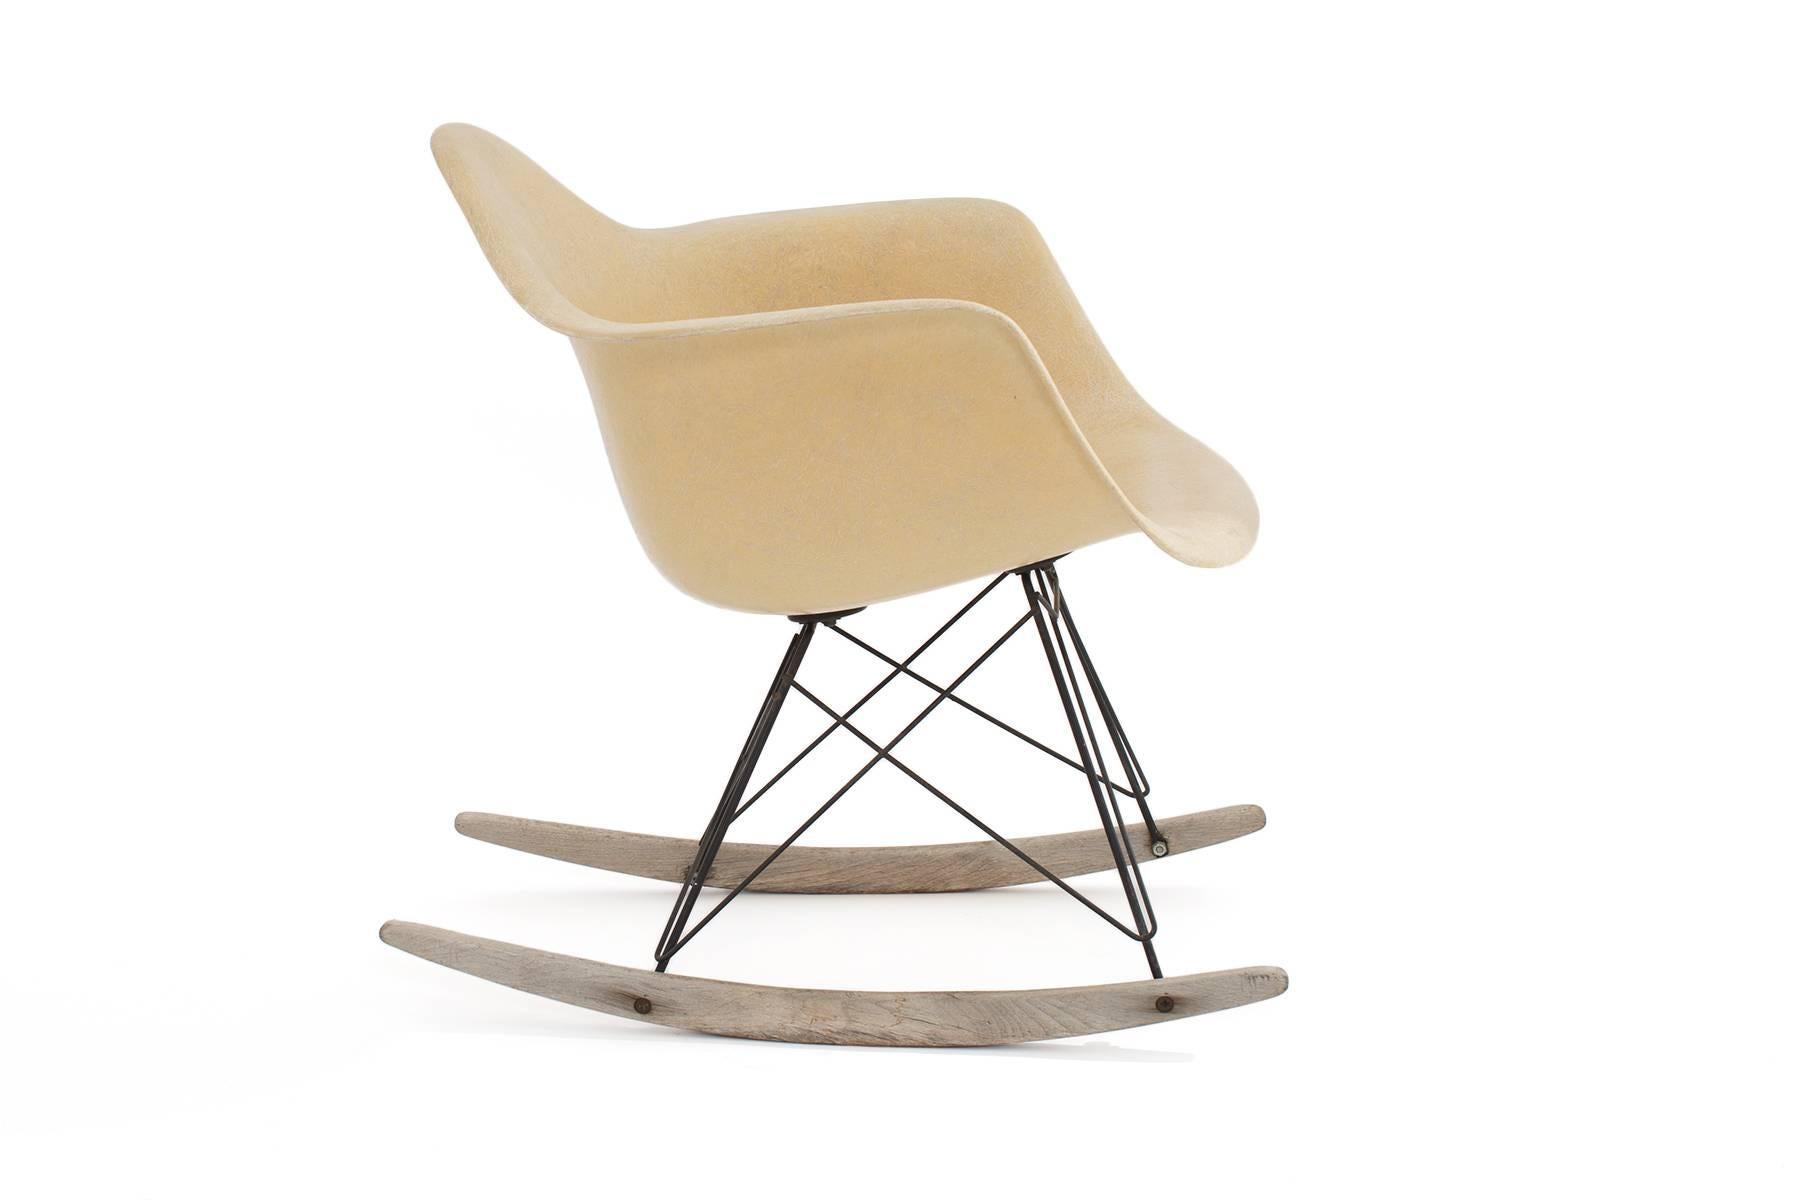 Second year production Eames for Herman Miller rocking chair, circa early 1950s. This all original example has a parchment colored arm shell, larger hockey puck shock mounts and original birch rocker base.
Please see our other listings for another